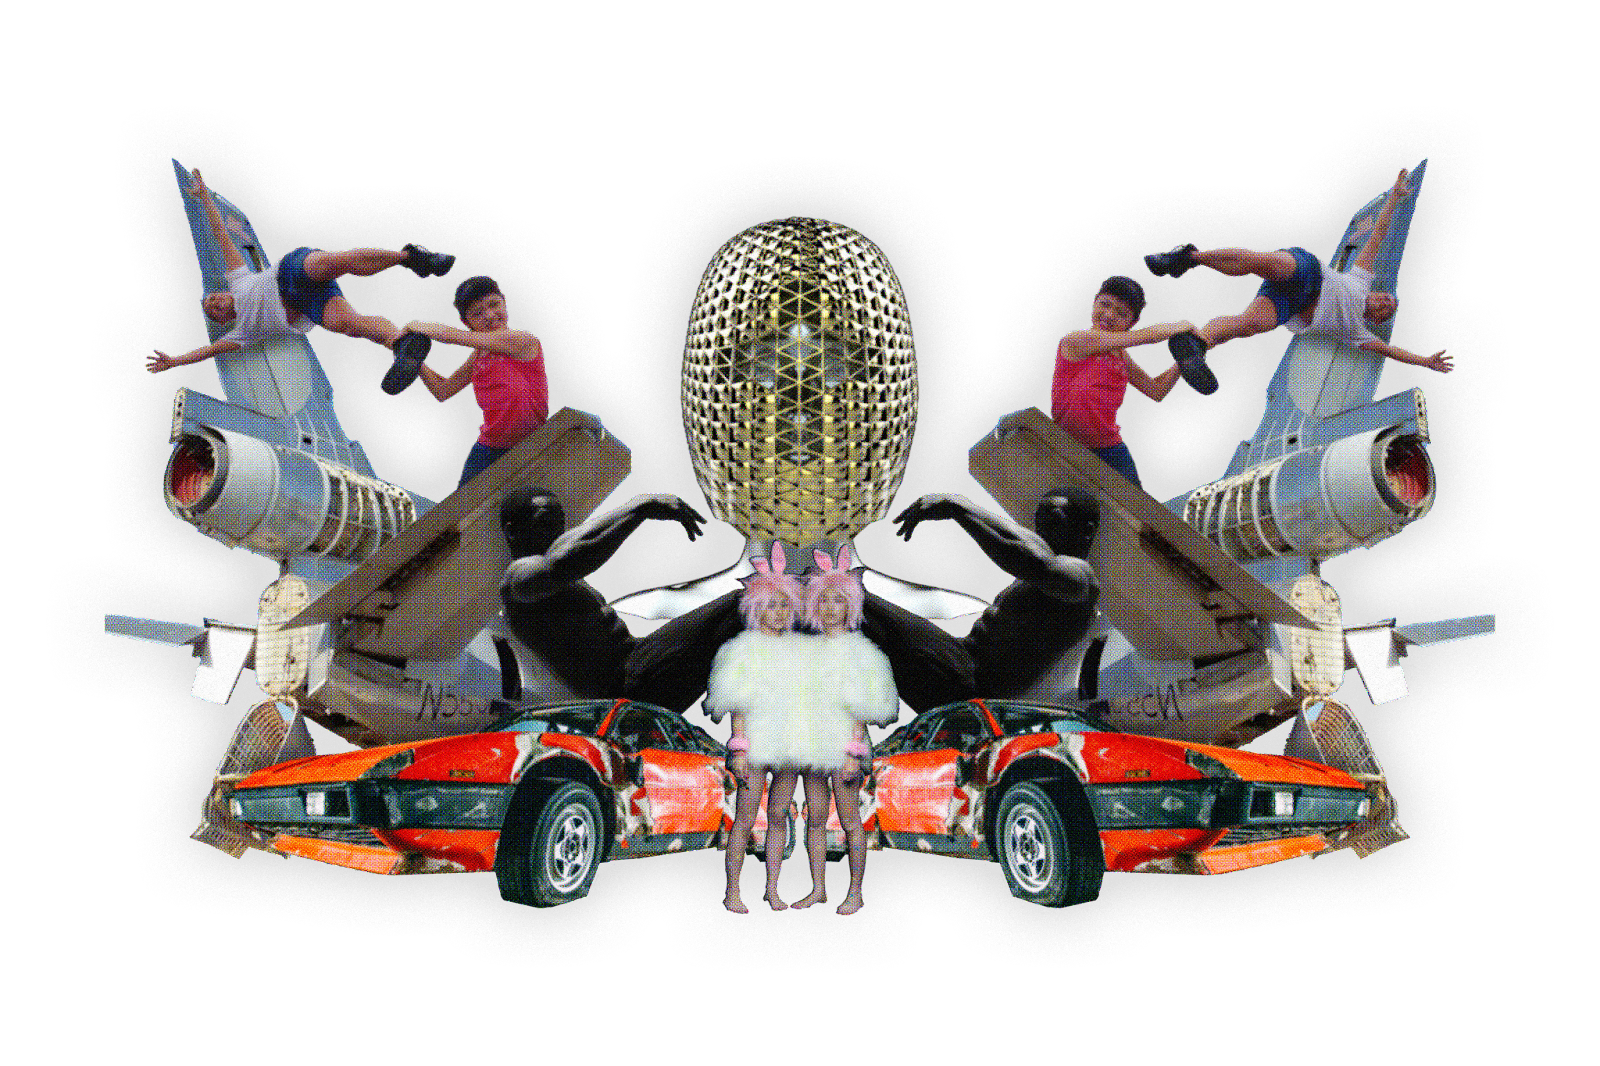 Collage mirrored at the centre with gold crown above two women in furry white top with pink bunny ears. On either side there is a crashed red Ferrari a dancer in a pose and the tails of two crashed planes and a child swinging another child by his foot.